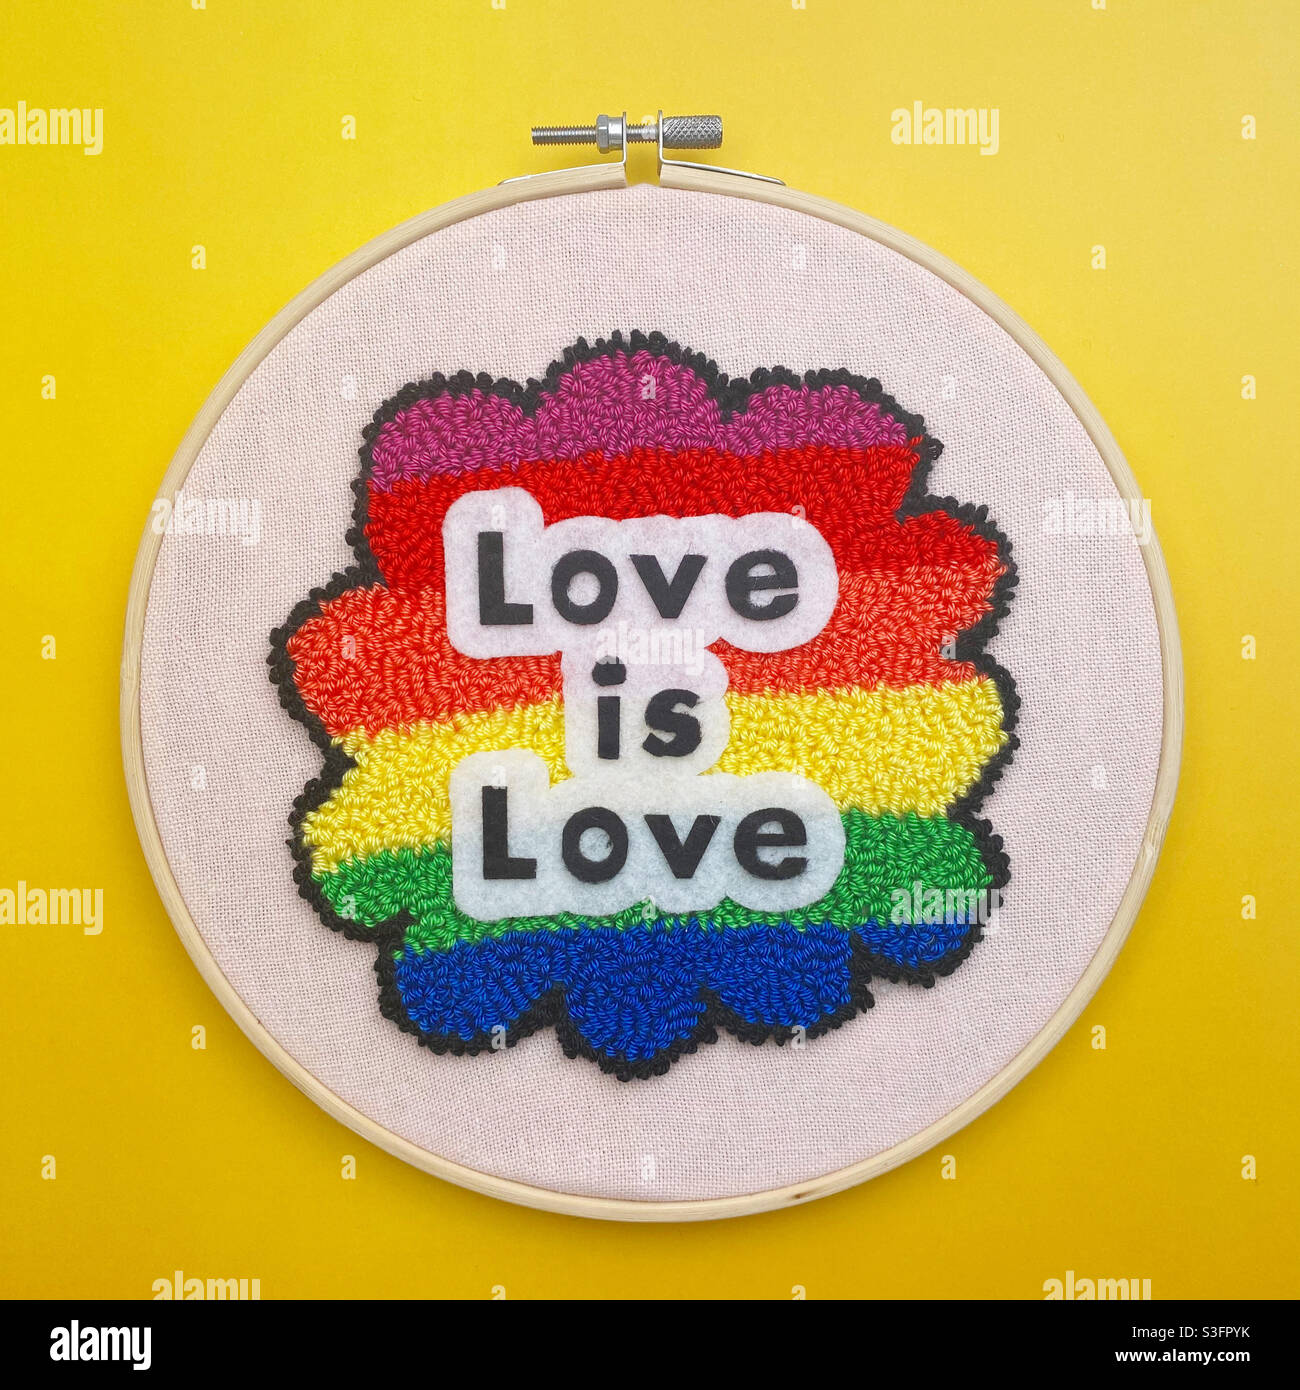 Rainbow Love is love punch needle embroidery Stock Photo